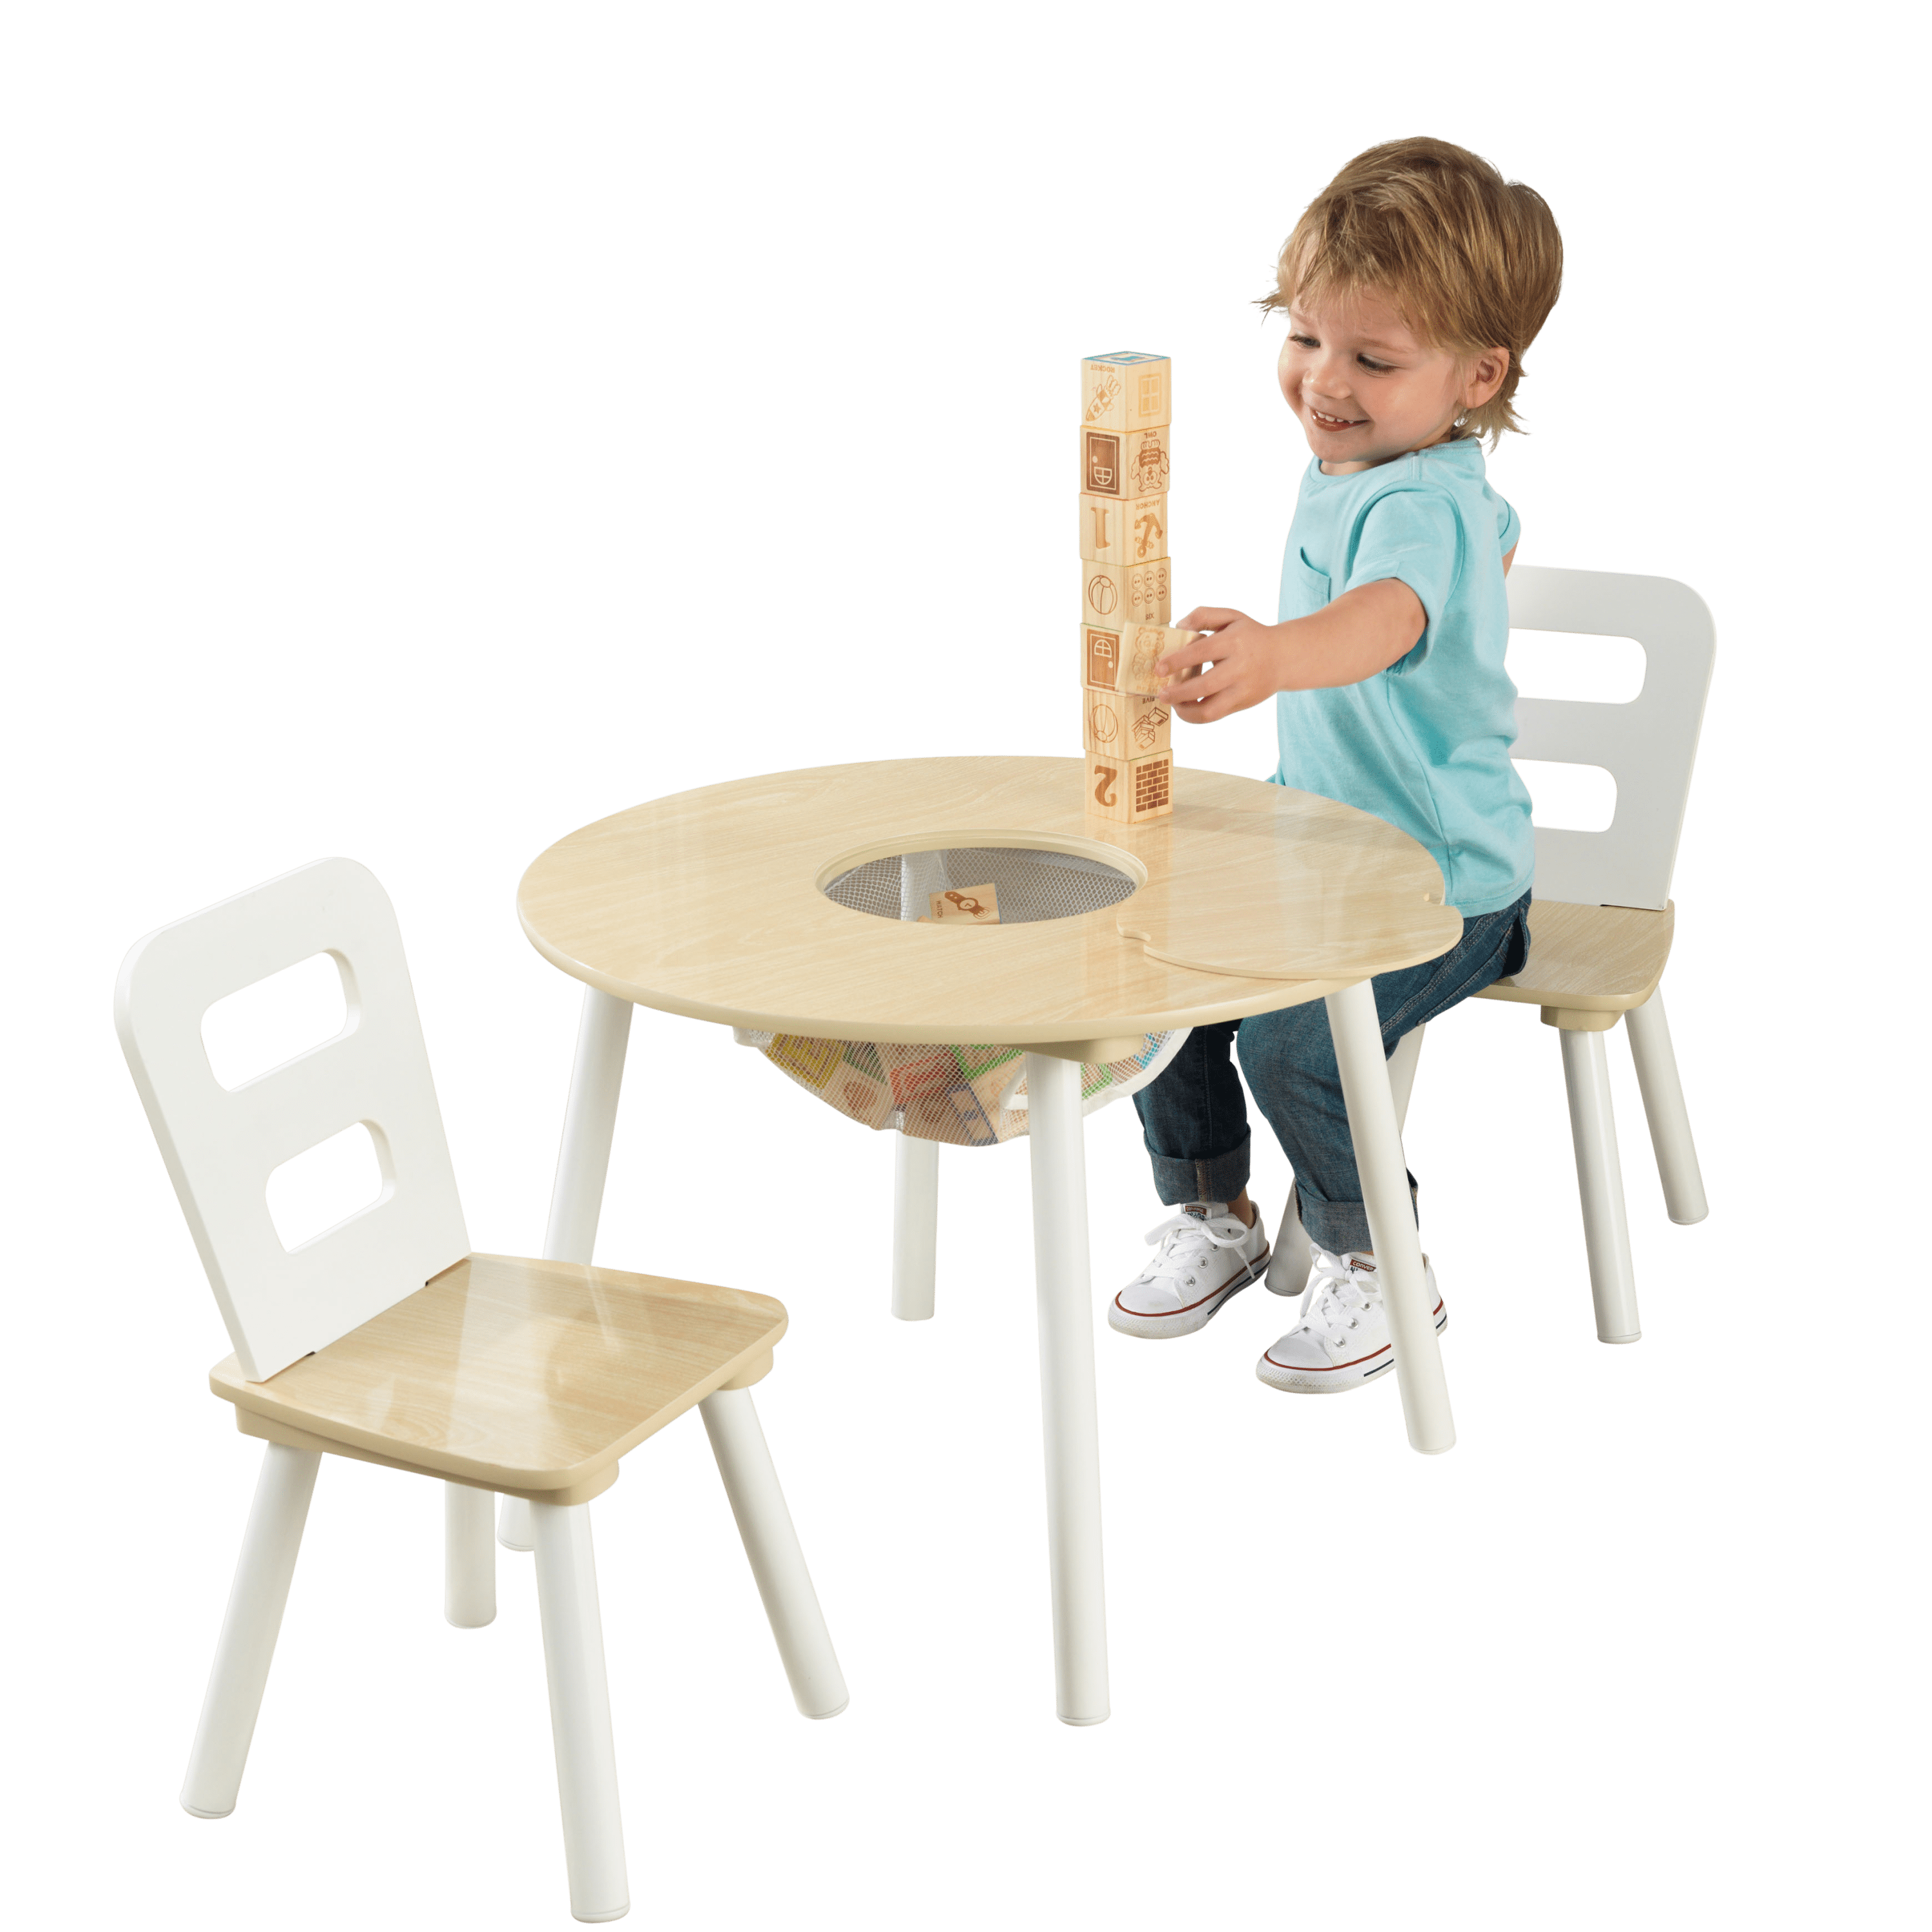 Details about   KIDKRAFT 3 PIECE ROUND TABLE AND 2 CHAIR SET CENTER MESH STORAGE LAVENDER&WHITE 